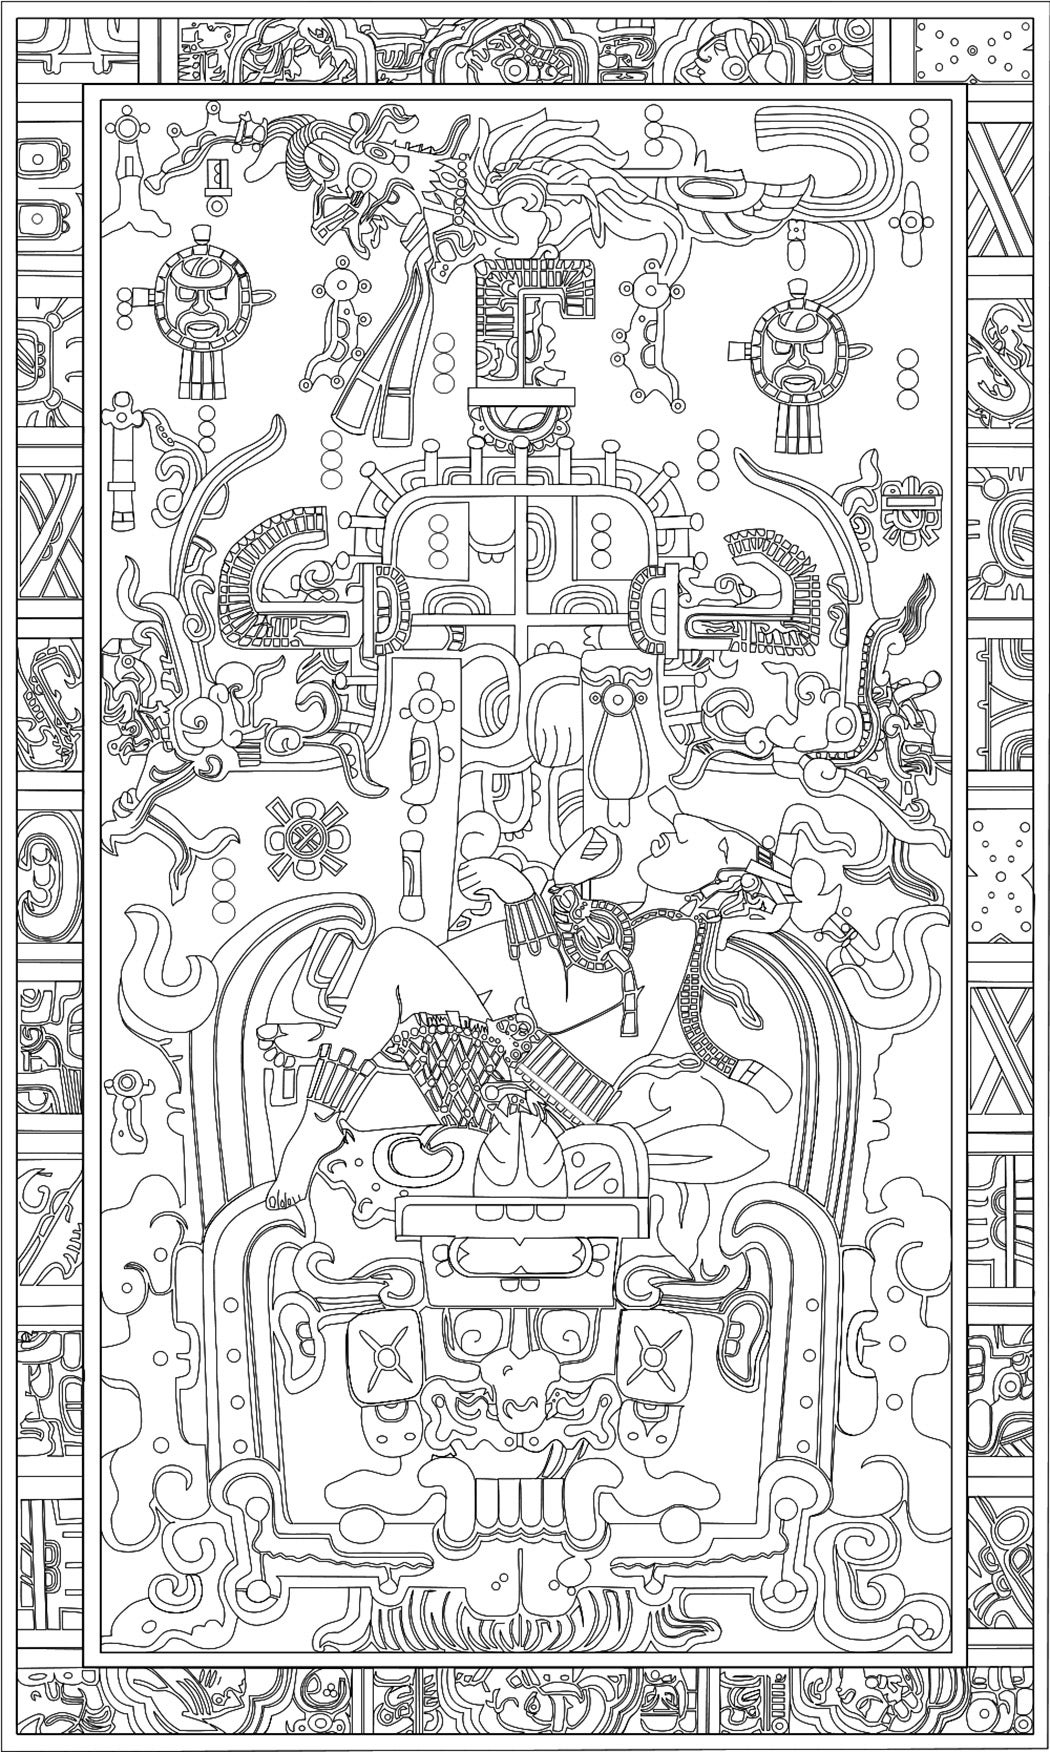 The lid of K'inich Janaab' Pakal's sarcophagus depicting the World Tree. The Mayan king of Palenque died in 683 C.E.